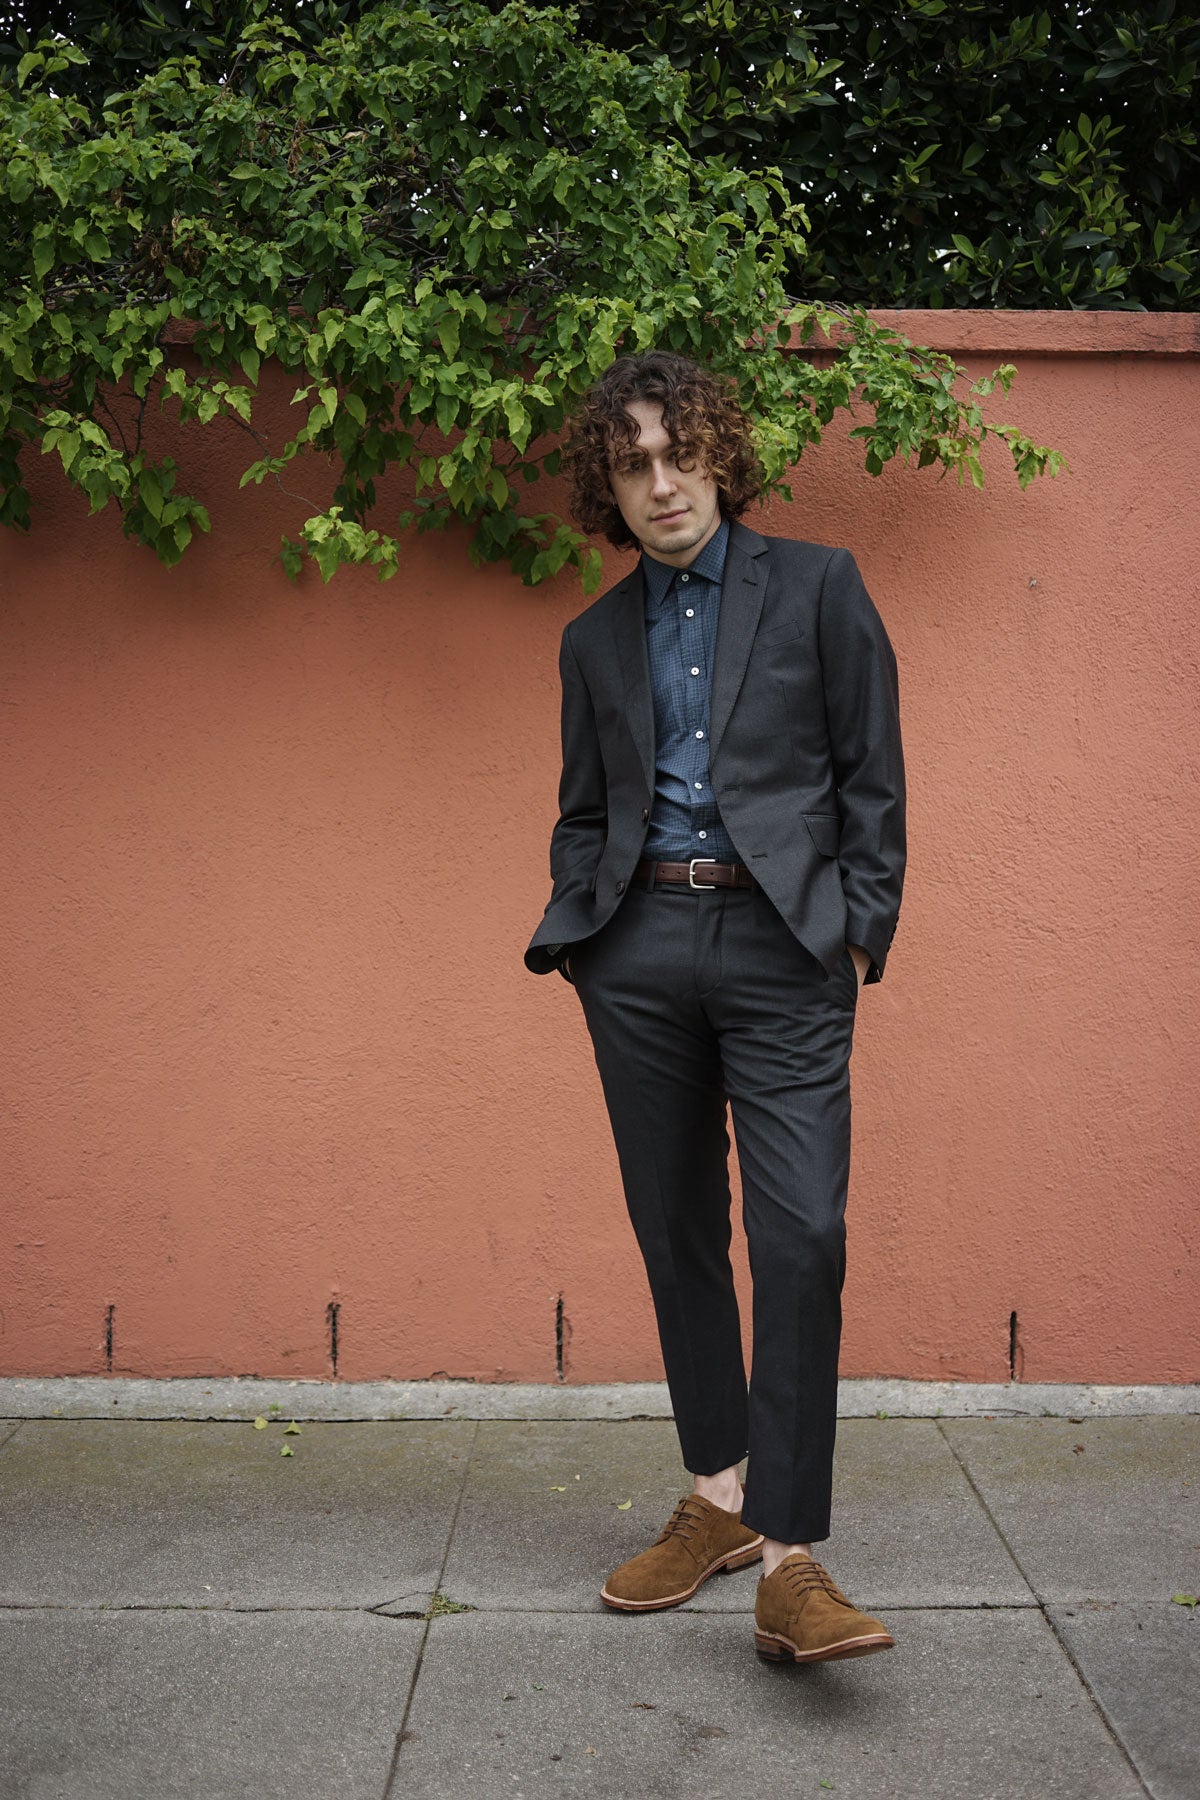 Model wears black suit with blue check shirt and brown leather belt in front of a terra cotta wall.